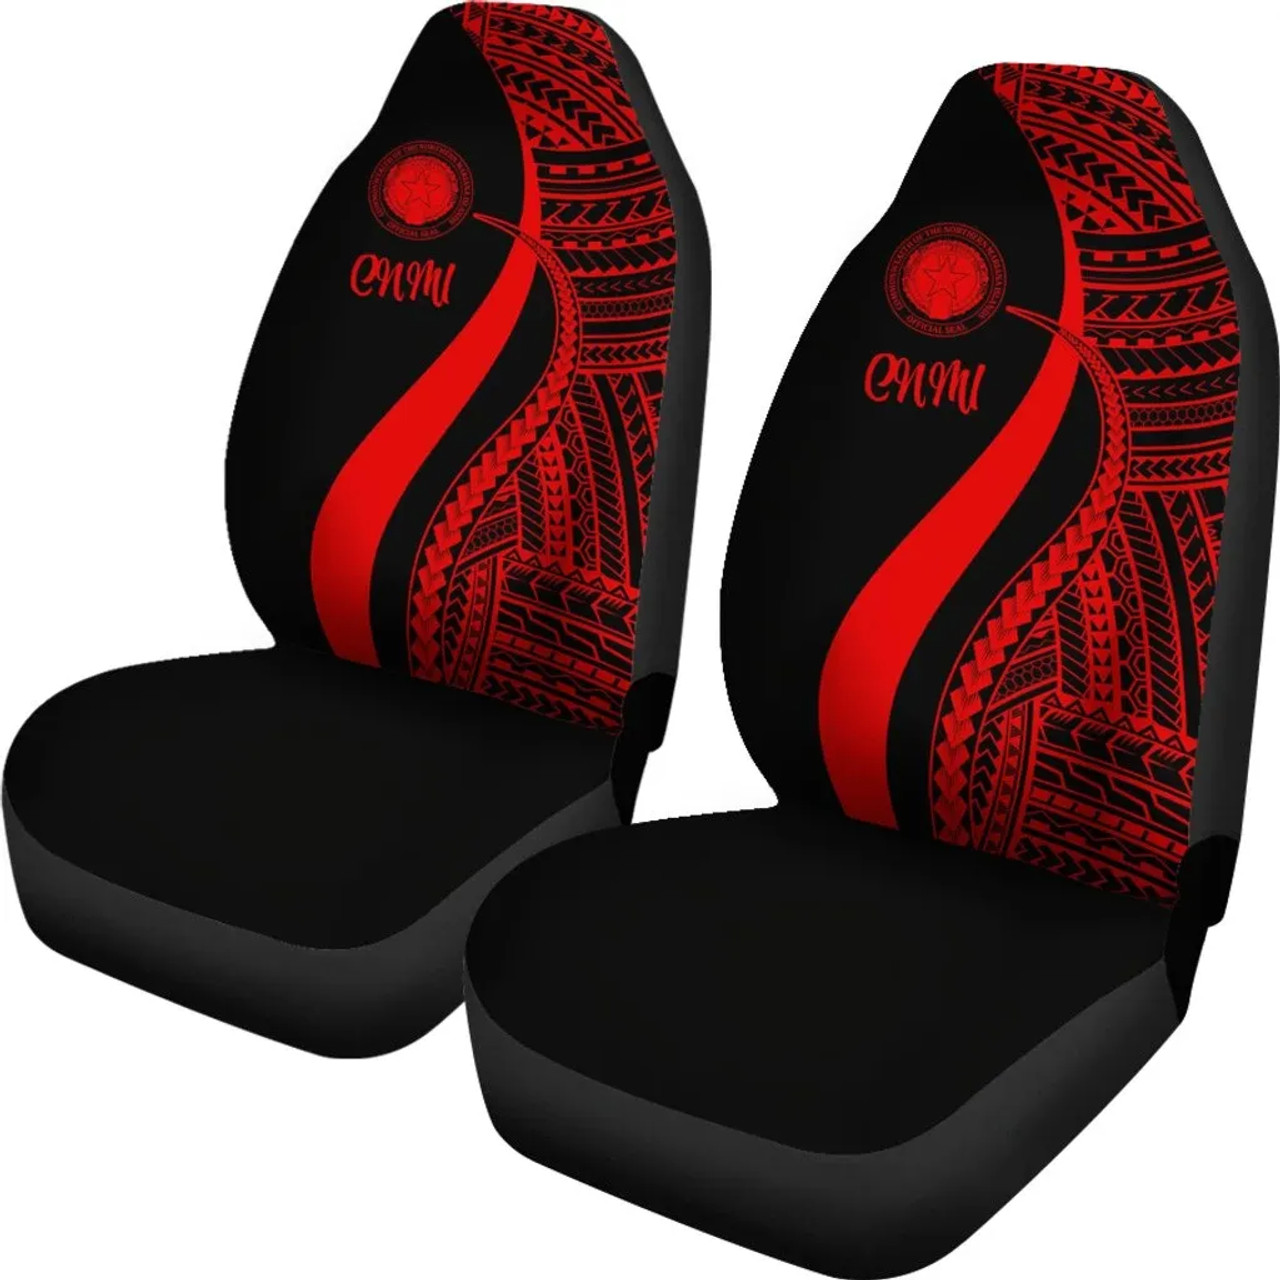 Northern Mariana Islands Car Seat Covers - Red Polynesian Tentacle Tribal Pattern